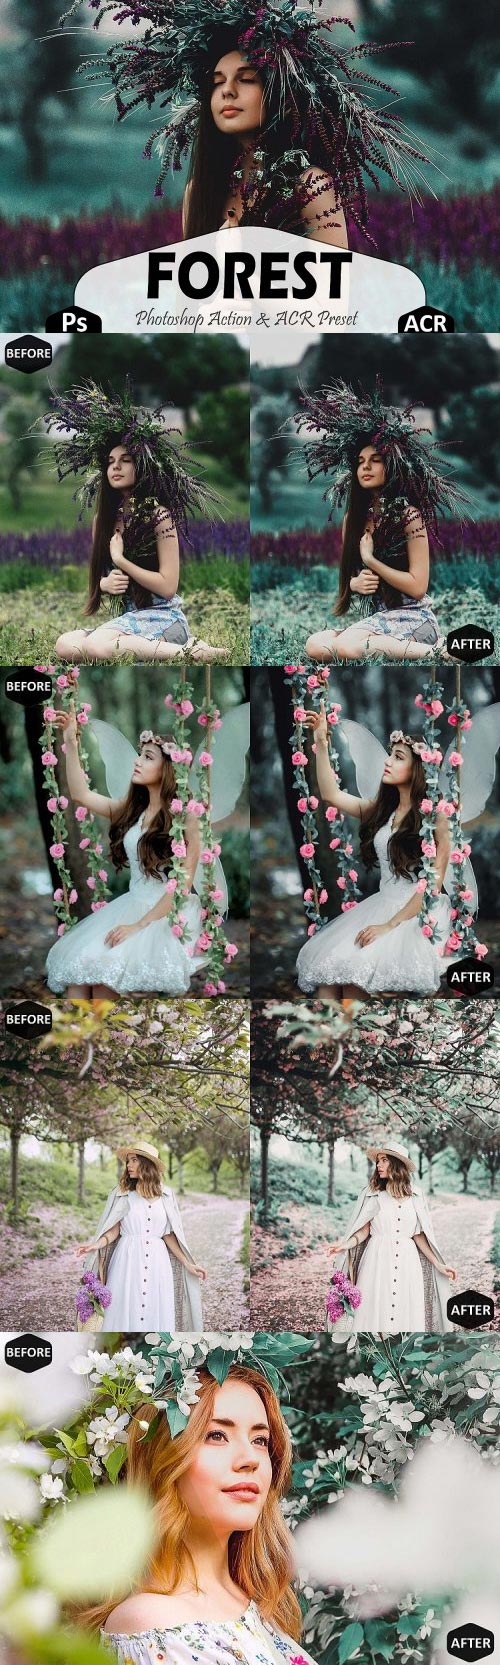 Forest Photoshop Actions And ACR Presets, Aqua Plant Ps